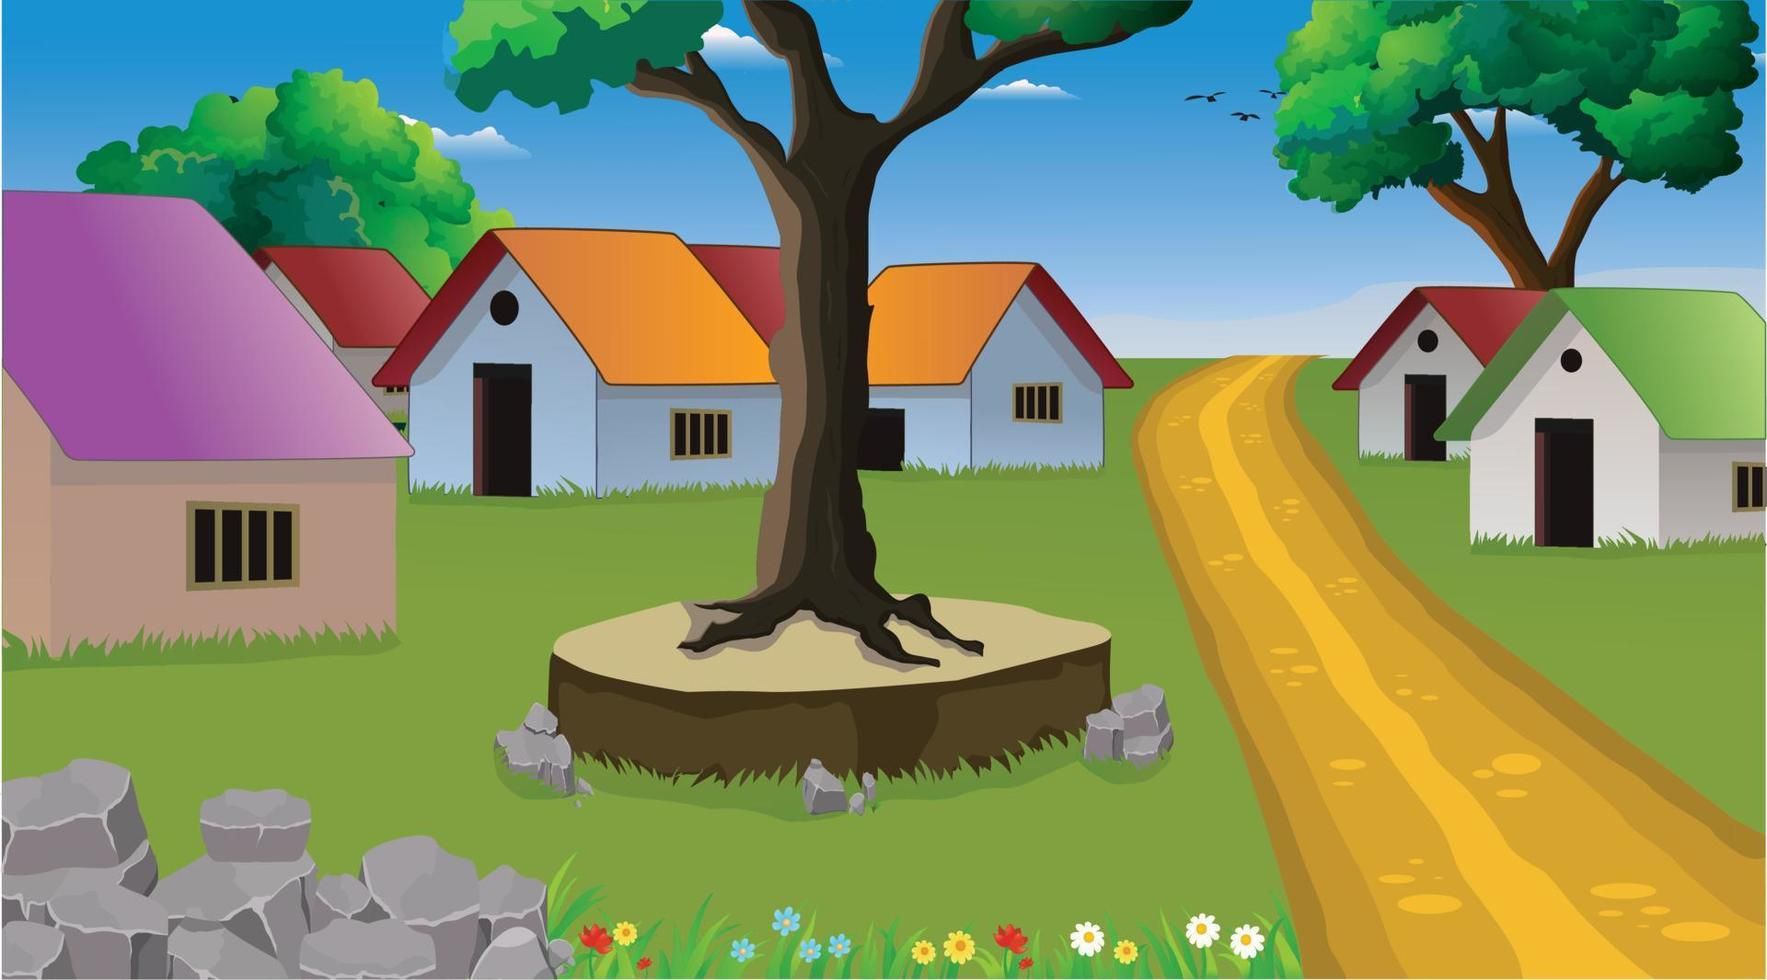 Download Village cartoon background illustration with old style cottage, well, t